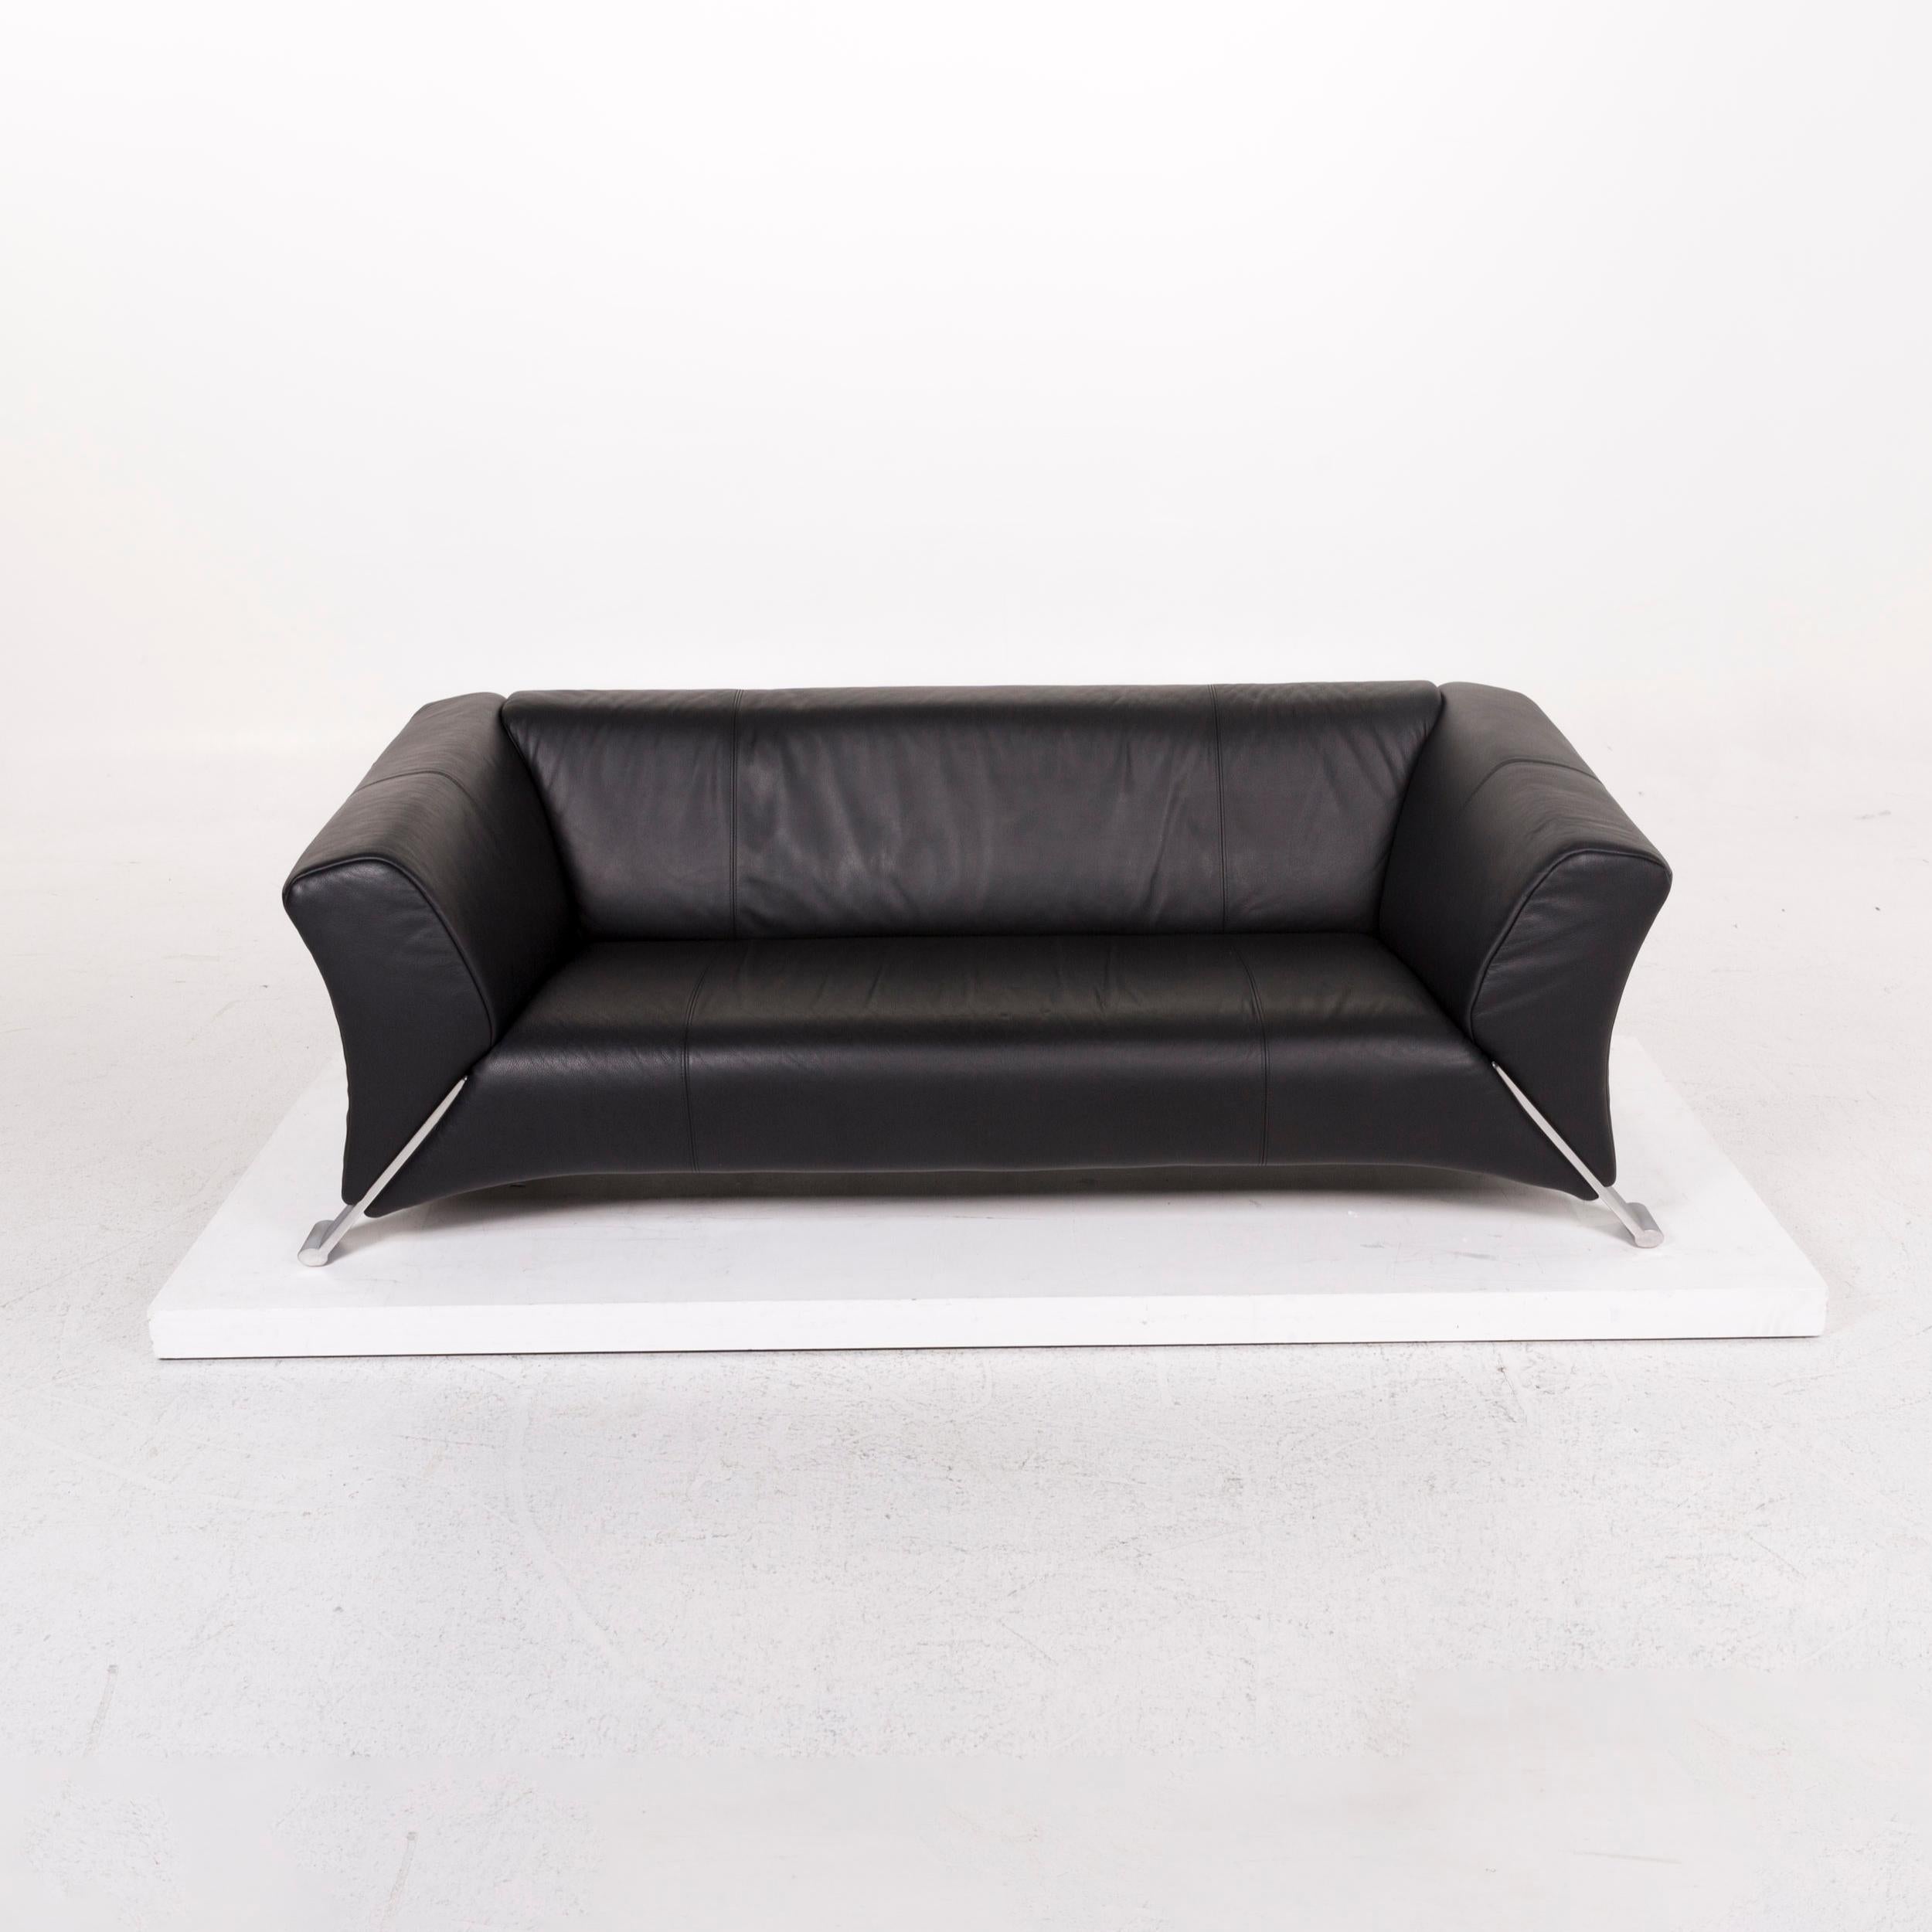 Rolf Benz 322 Leather Sofa Black Two-Seat Couch 2